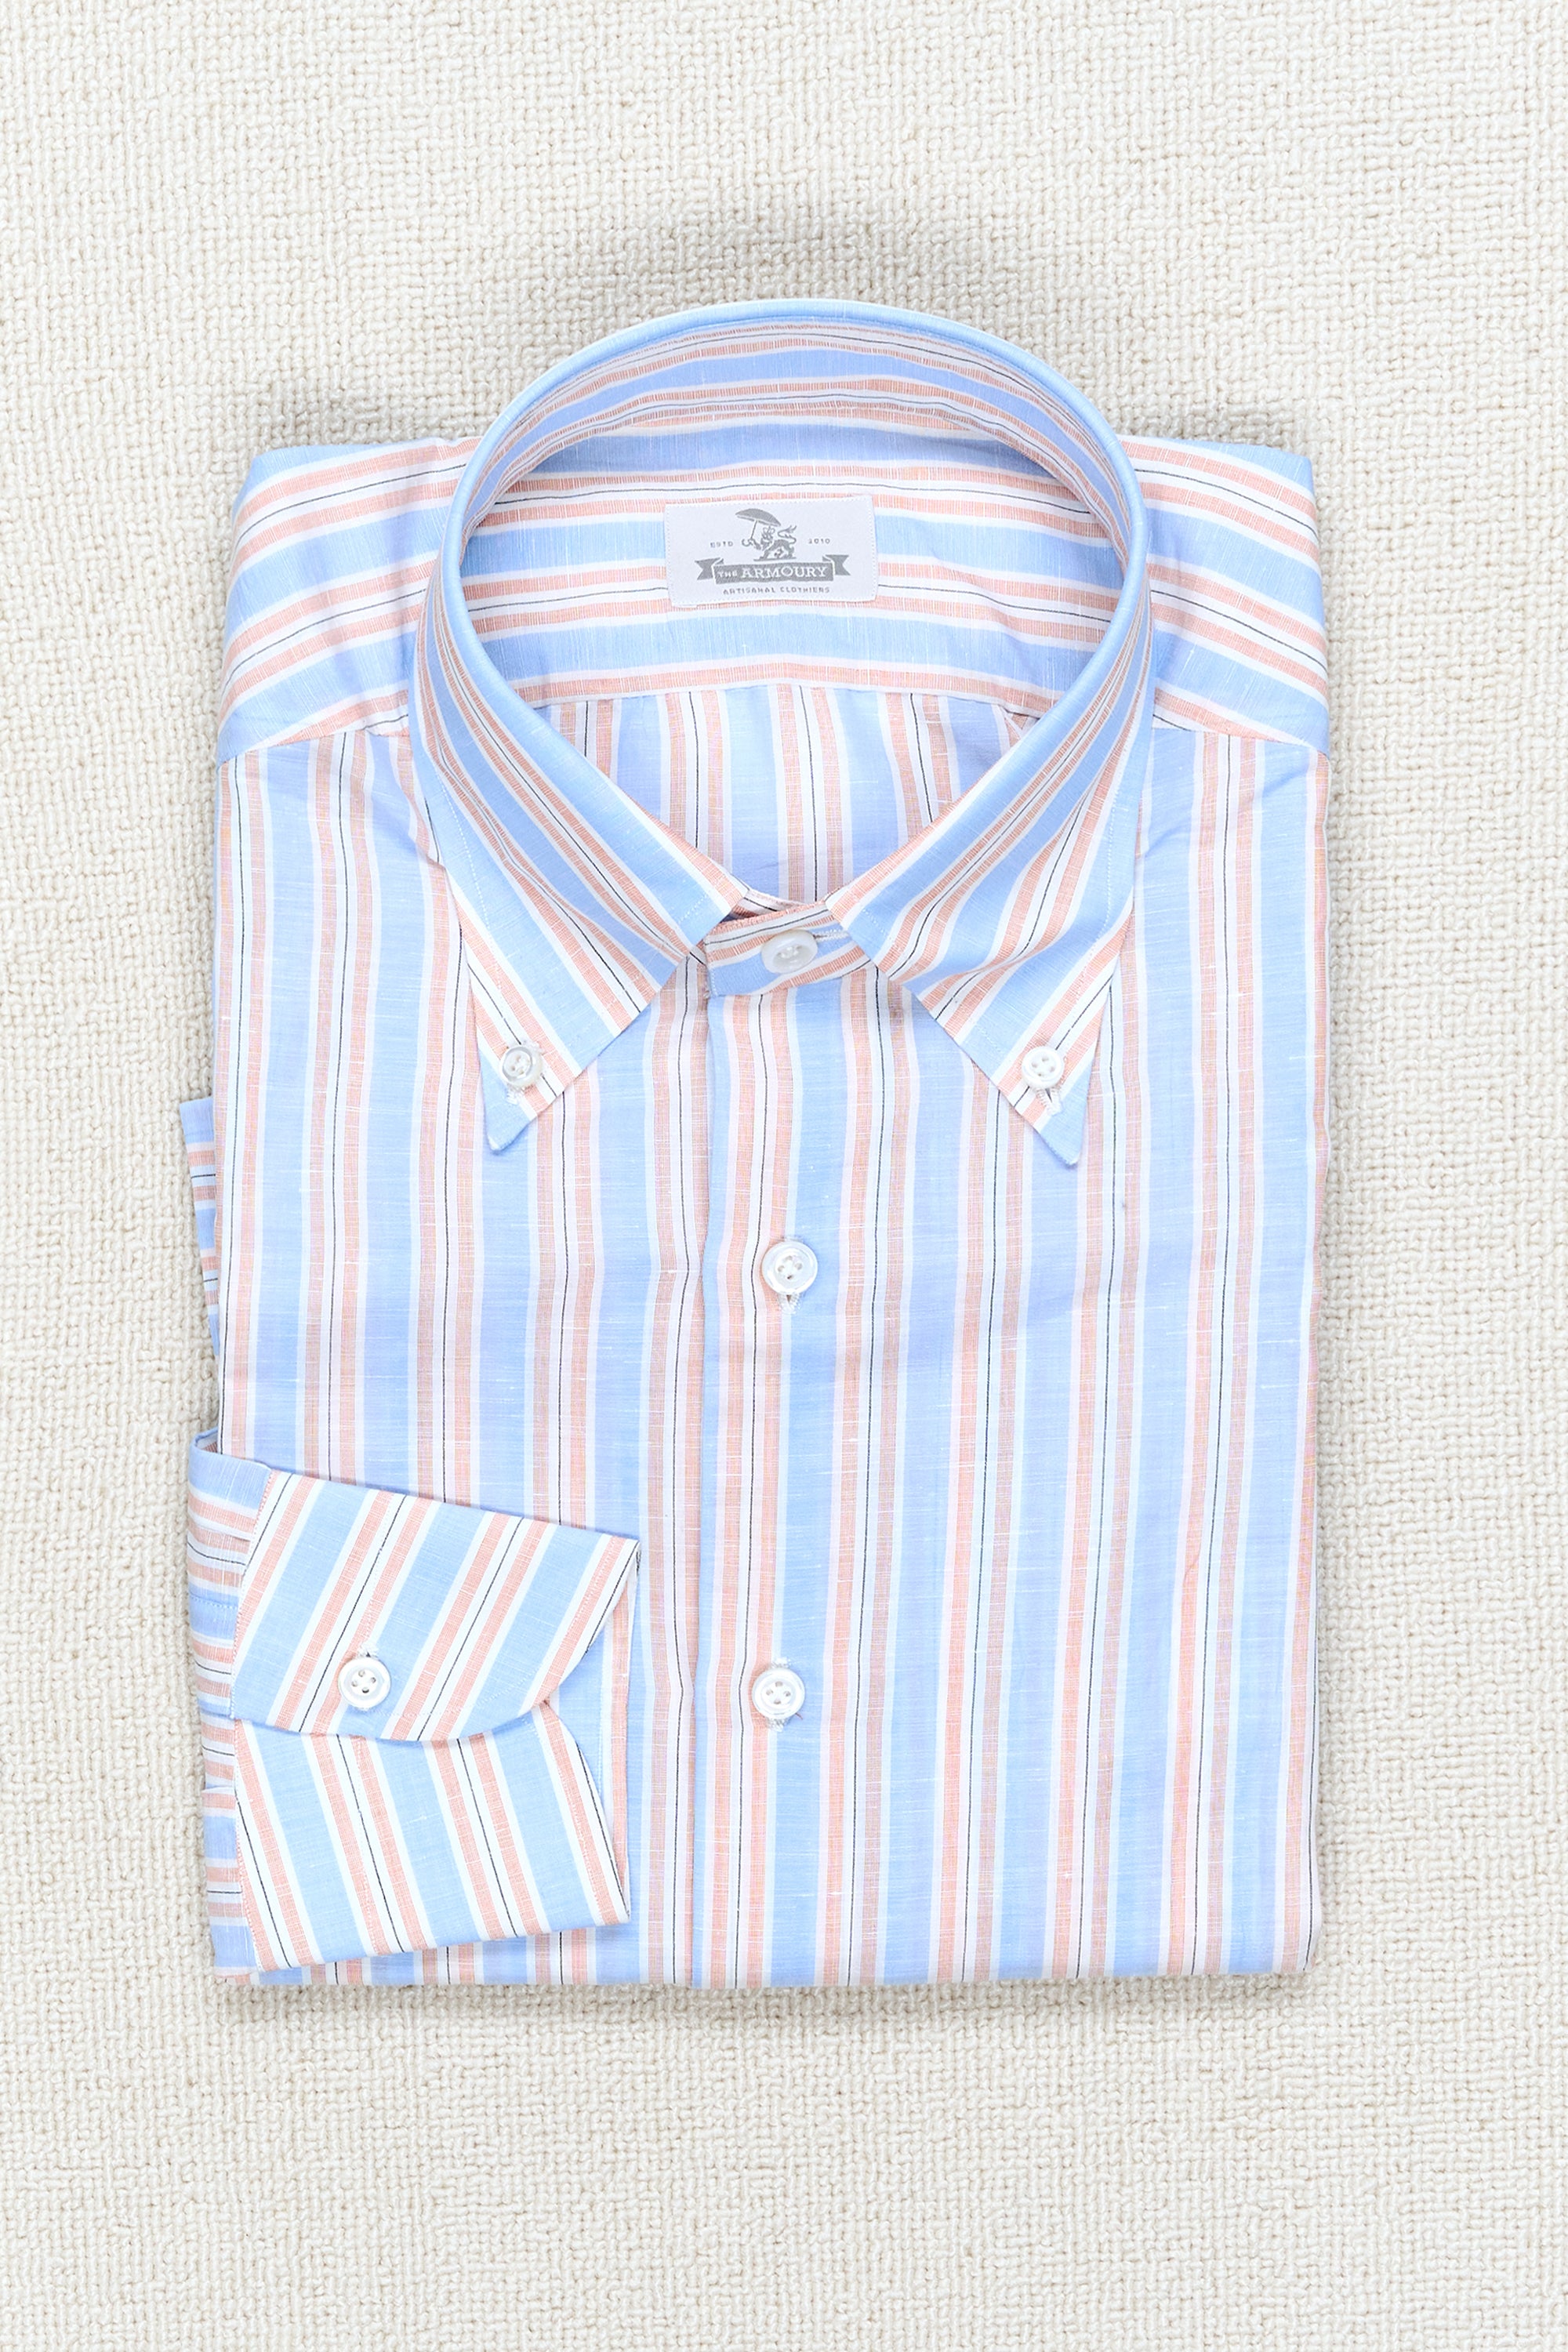 The Armoury Carlo Riva Blue with Coral Stripe Cotton/Linen Button Down Shirt